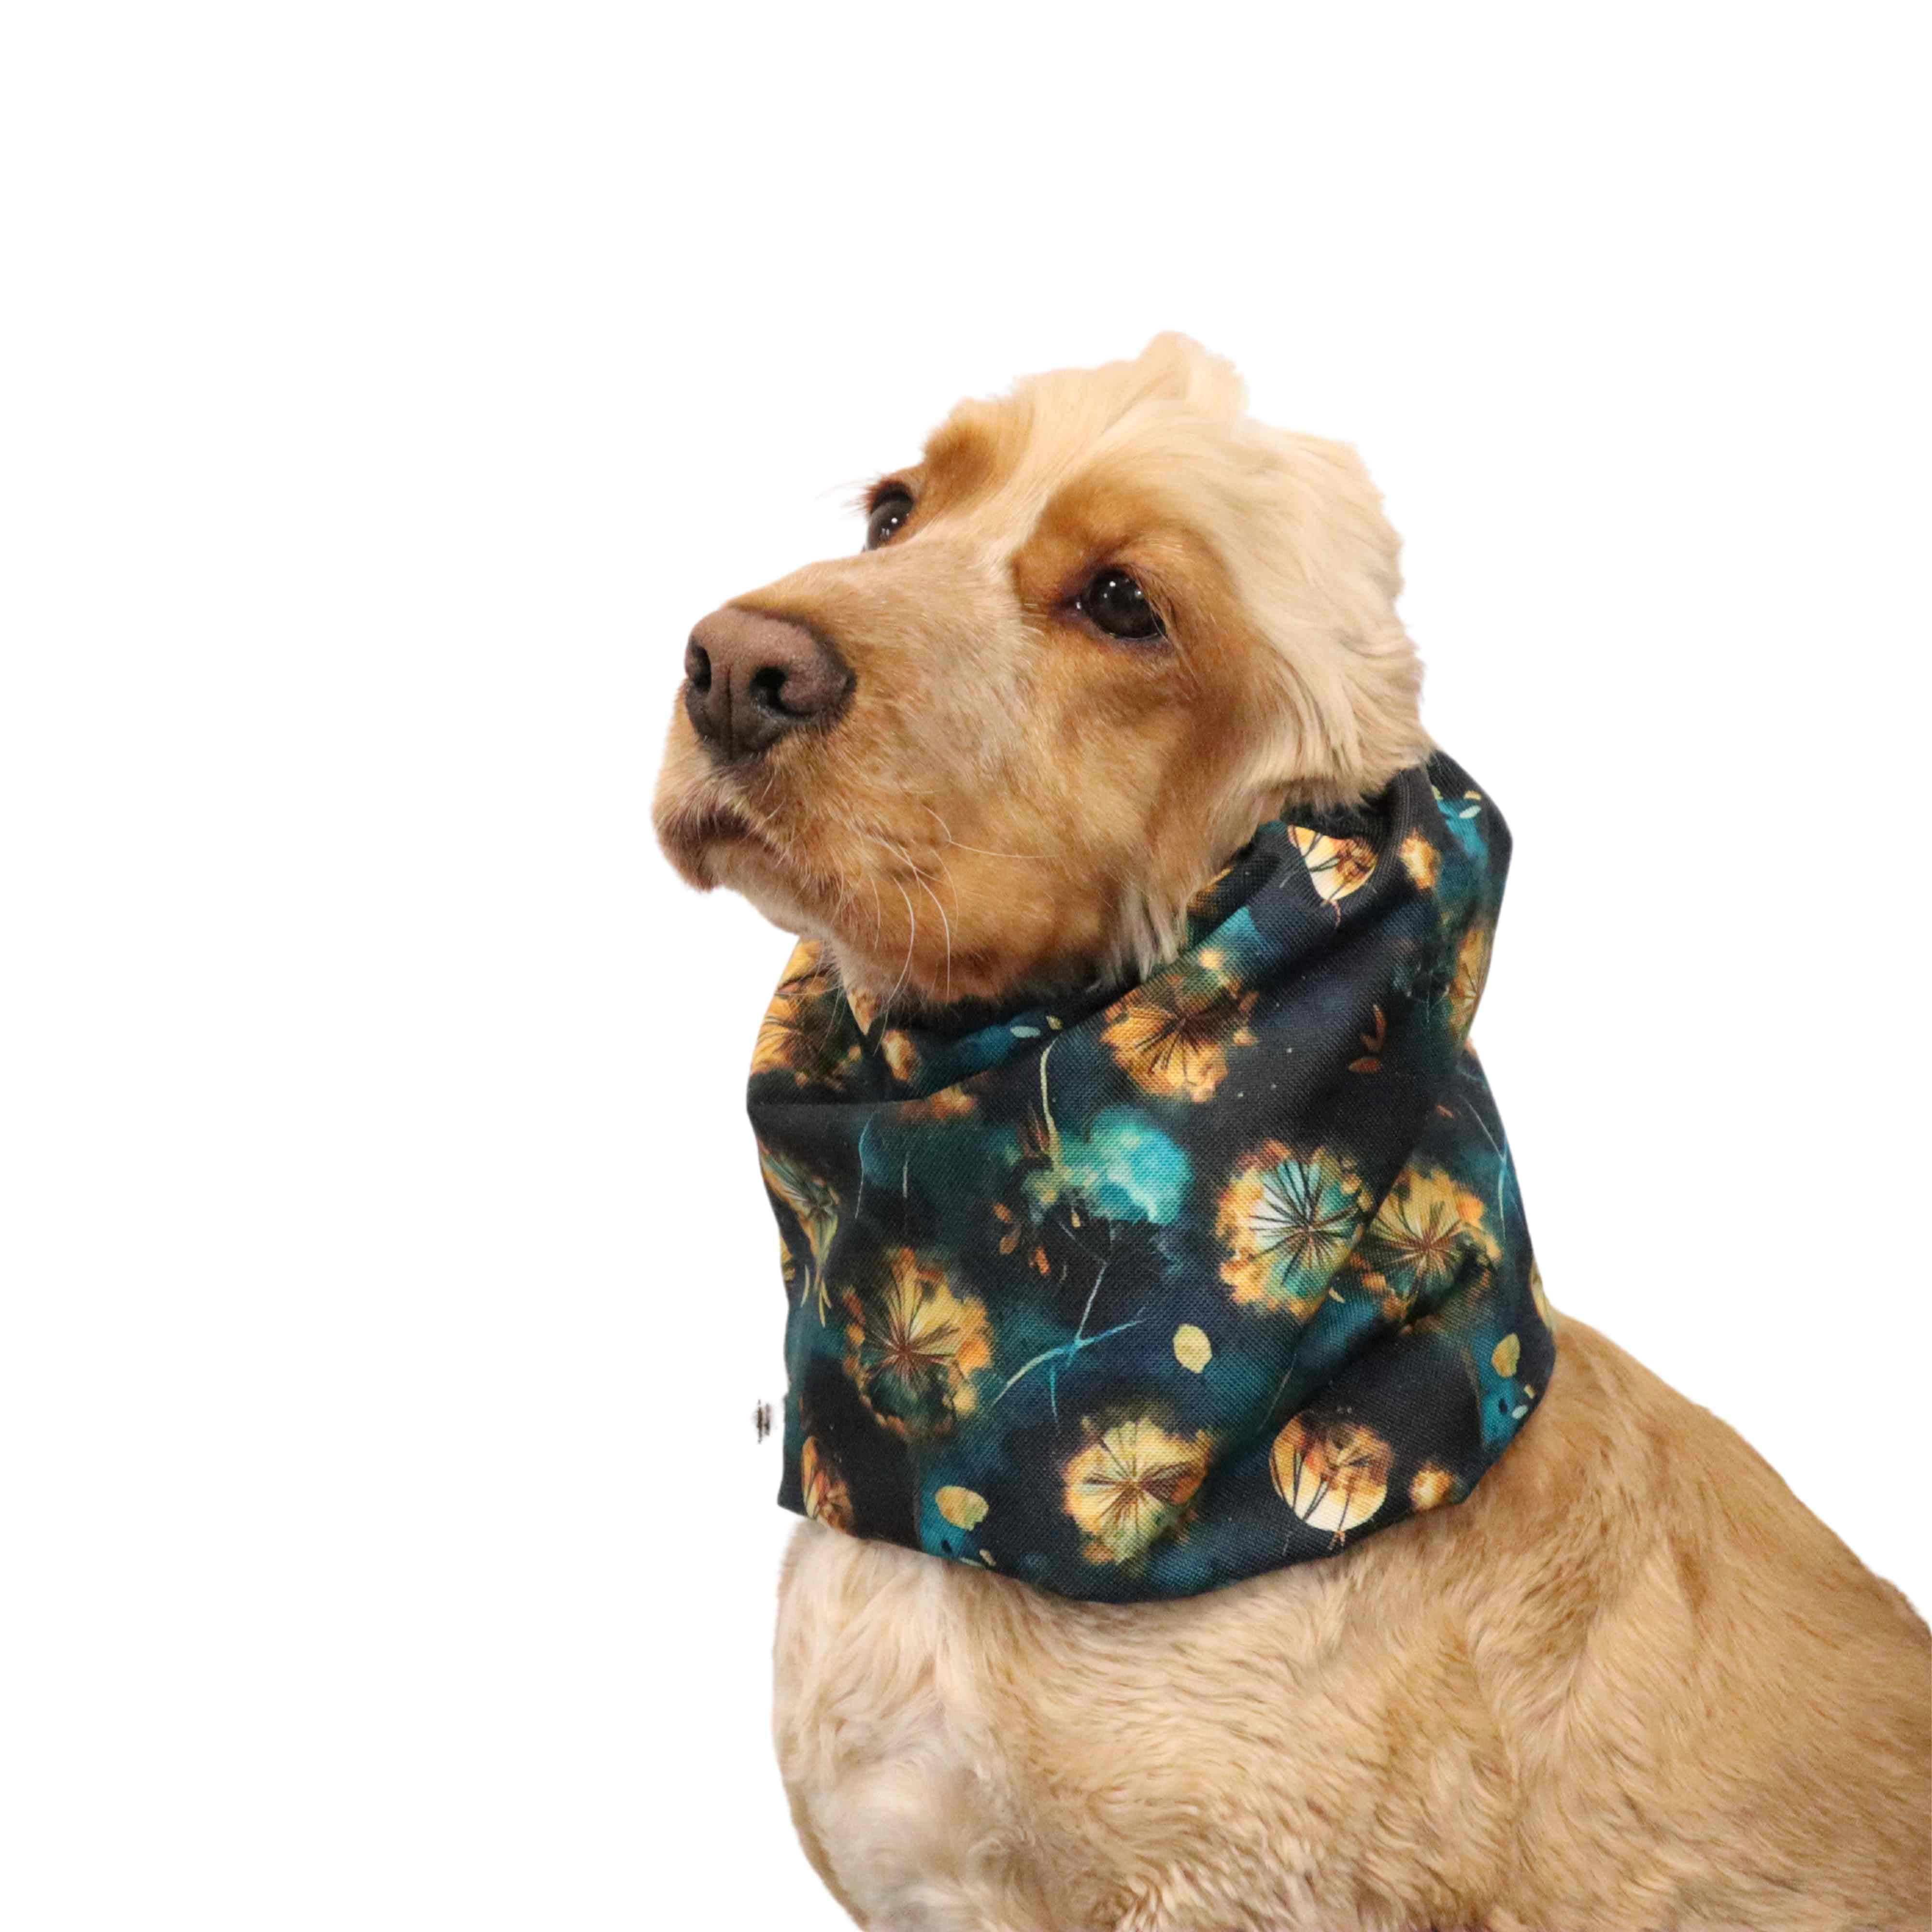 Dog with waterproof snood by Distinguish Me